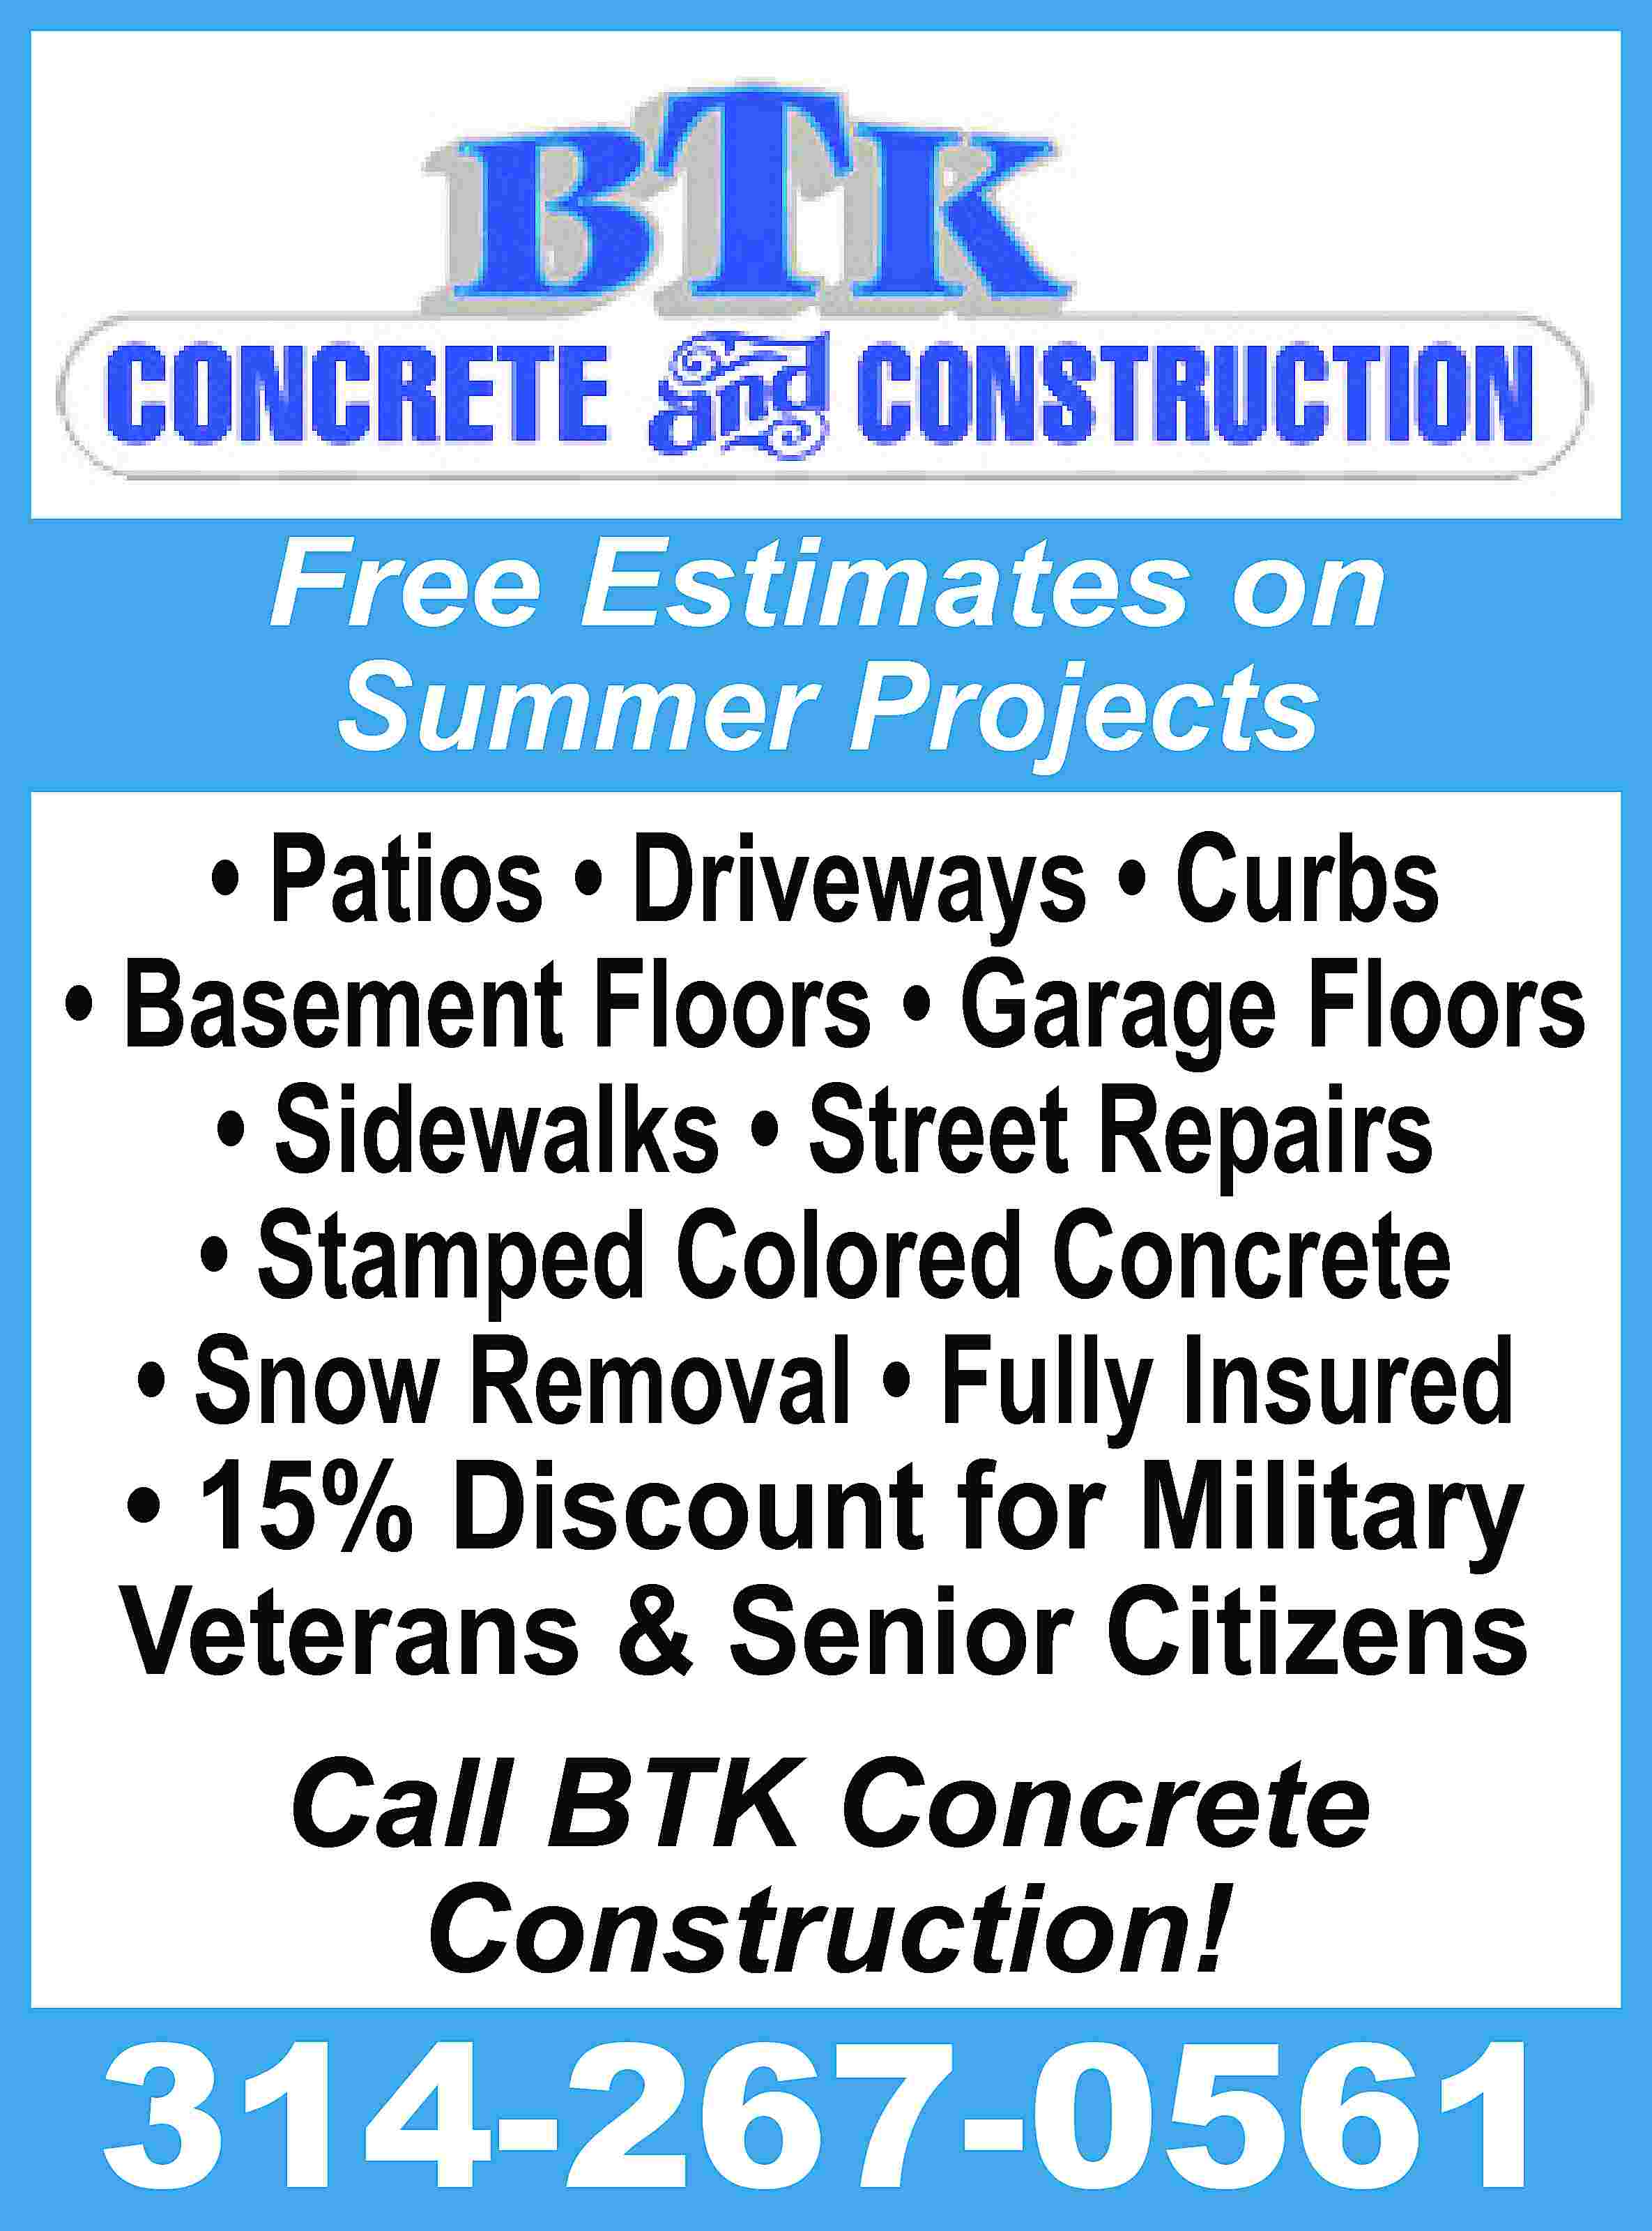 Free Estimates on Summer Projects  Free Estimates on Summer Projects • Patios • Driveways • Curbs • Basement Floors • Garage Floors • Sidewalks • Street Repairs • Stamped Colored Concrete • Snow Removal • Fully Insured • 15% Discount for Military Veterans & Senior Citizens Call BTK Concrete Construction! 314-267-0561